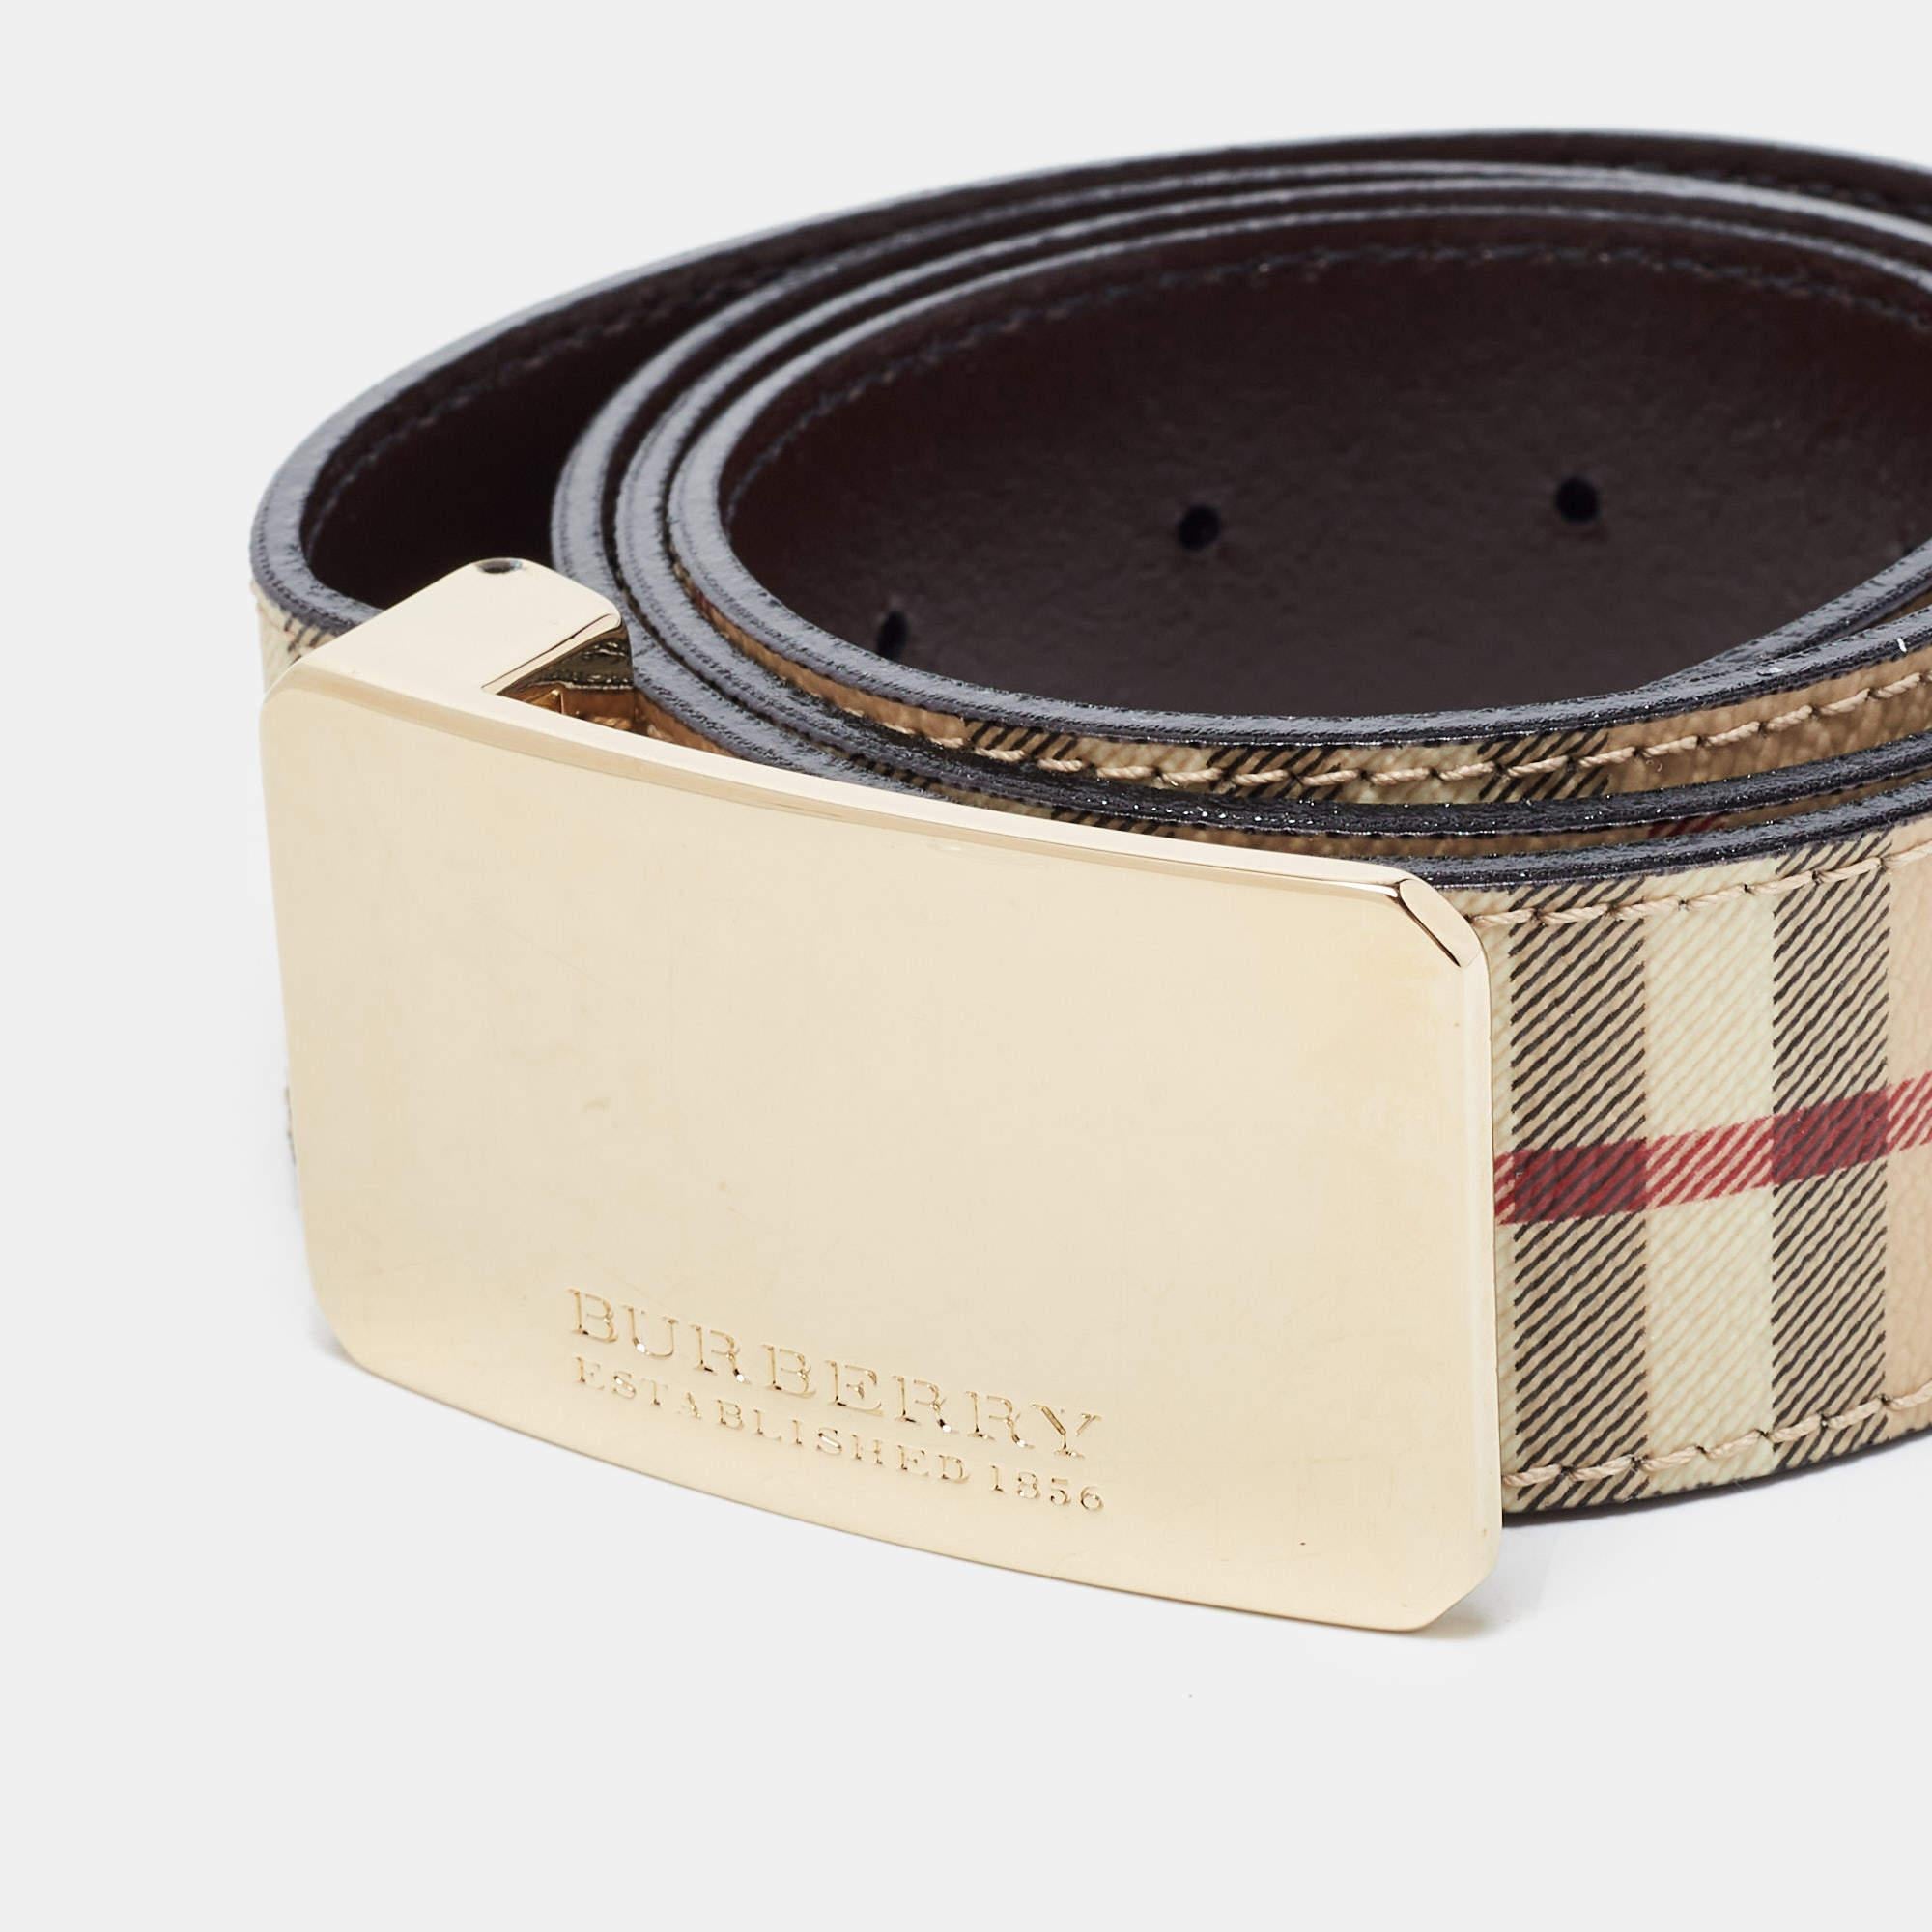 Belts are amazing accessories offering both functionality and style. If you're looking to add one, we have this fine choice by Burberry. It has a luxe look and a beautiful finish.

Includes: Original Dustbag, Original Box, Brand Tag